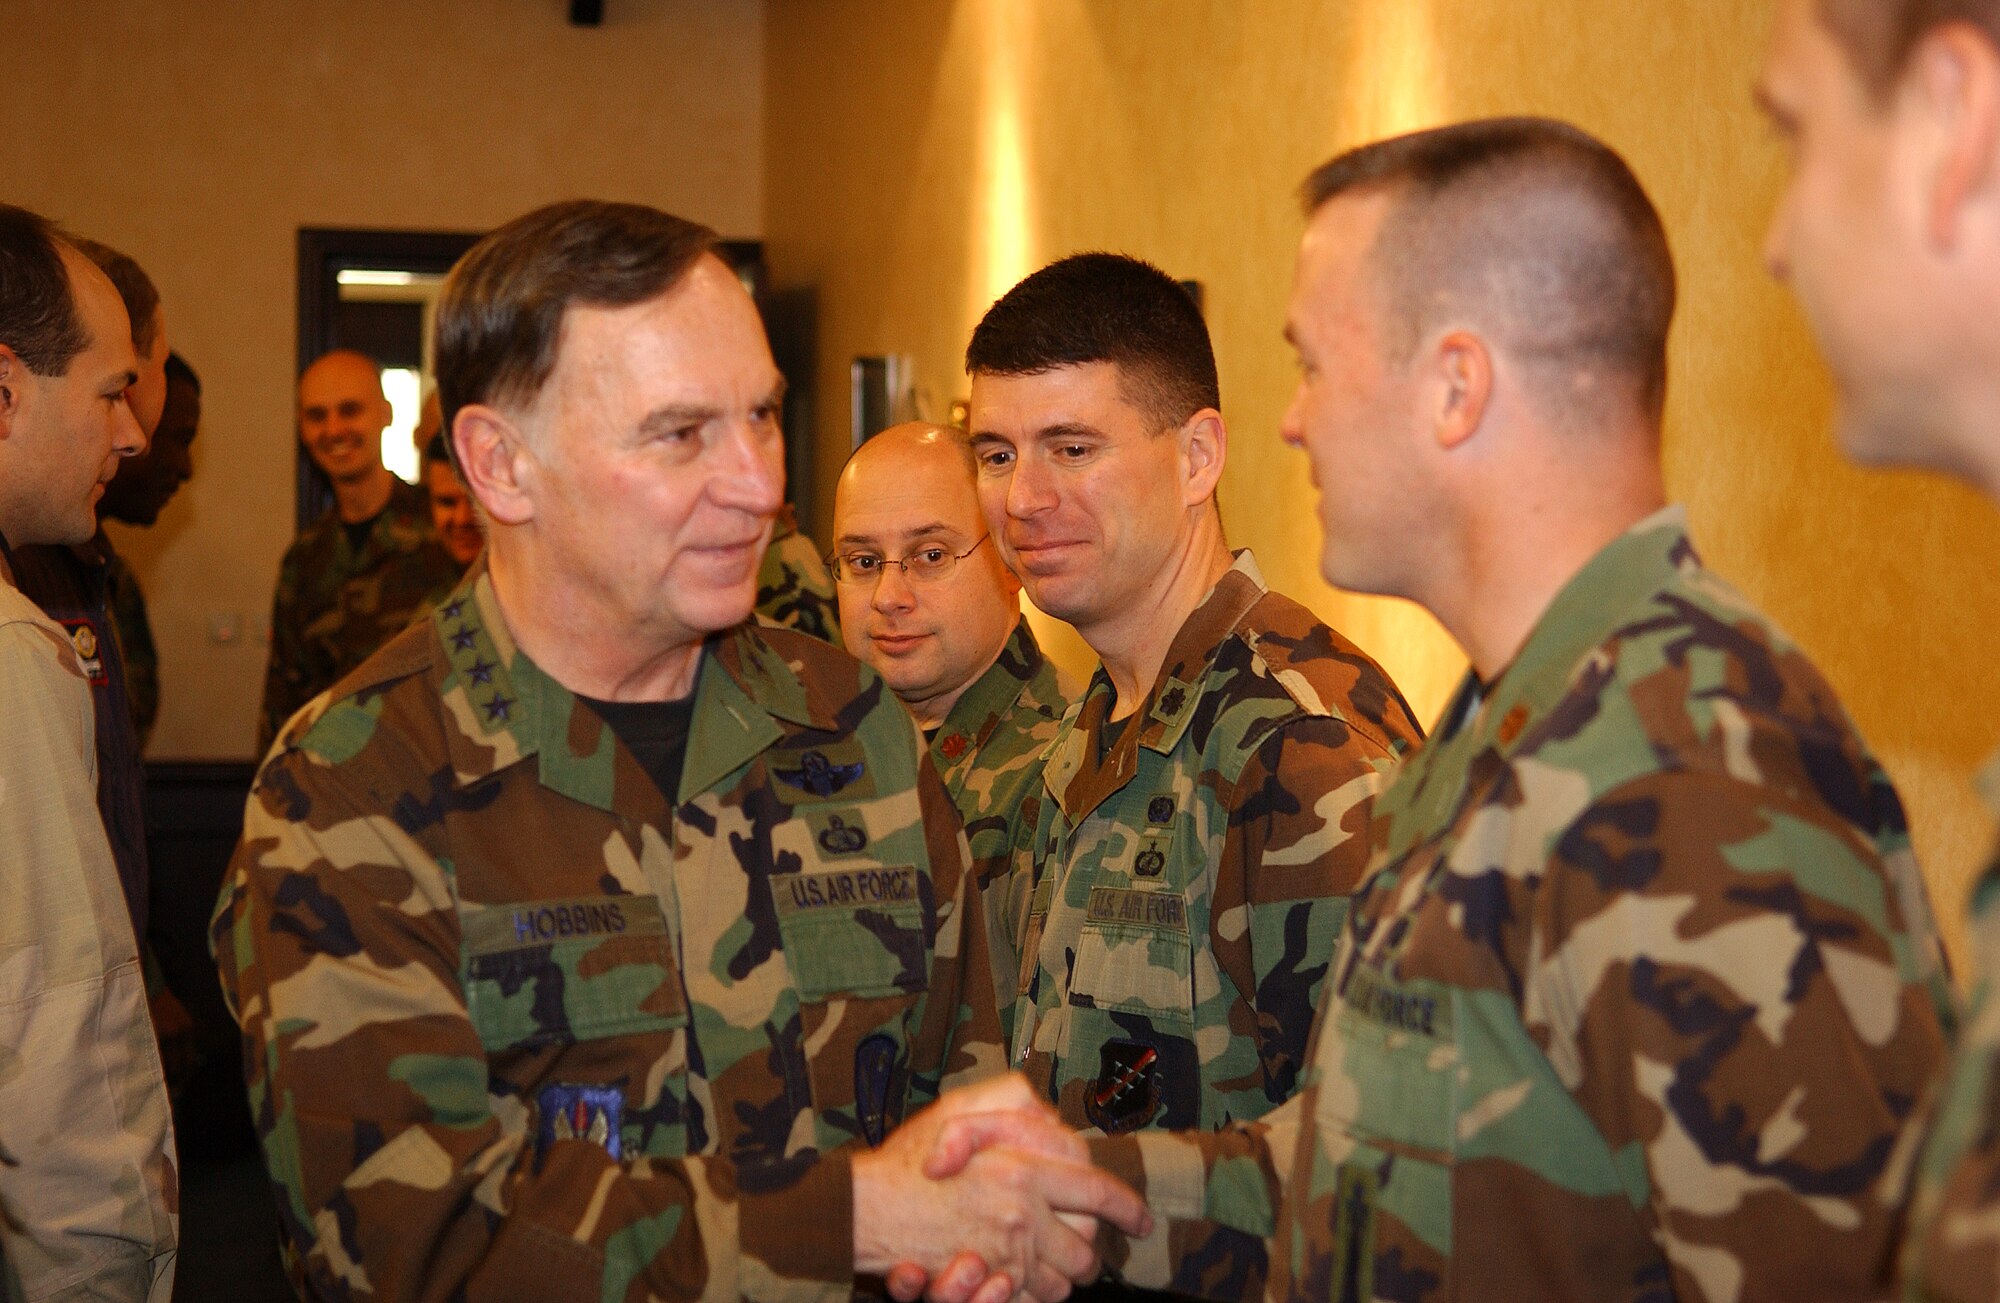 General Tom Hobbins, U.S. Air Forces in Europe commander, shakes hands with 39th Air Base Wing members after arriving here Dec. 20. General Hobbins and Chief Master Sgt. Gary Coleman, USAFE command chief, visited Team Incirlik to talk with Airmen, discuss future USAFE operations and wish every one here a happy holiday season. (U.S. Air Force photo by Staff Sgt. Chris Galindo)